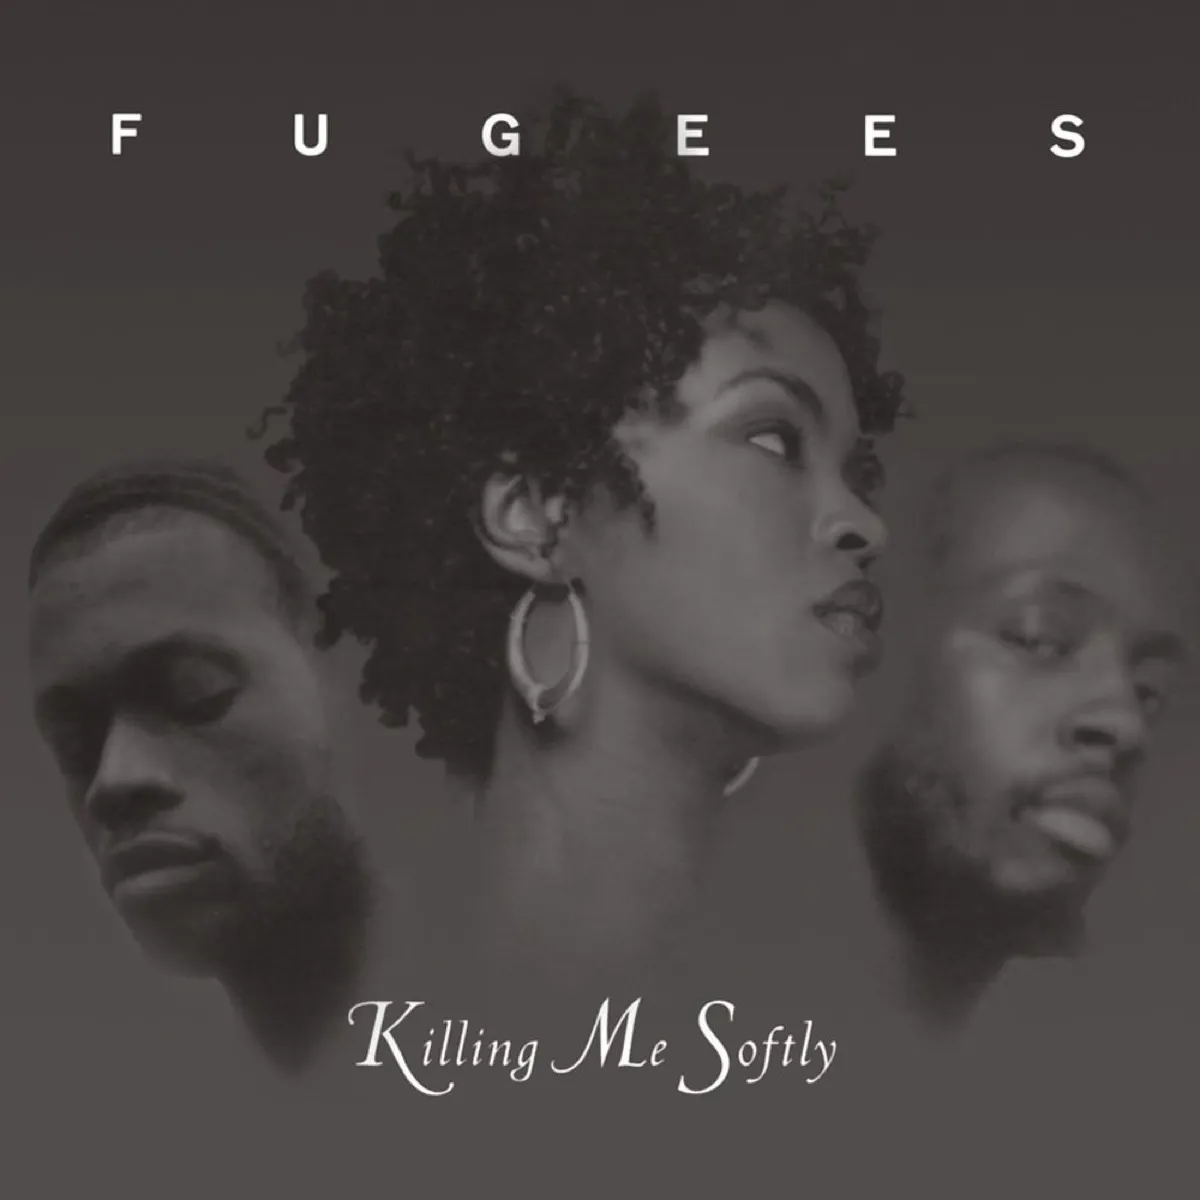 Fugees "Killing Me Softly" Cover